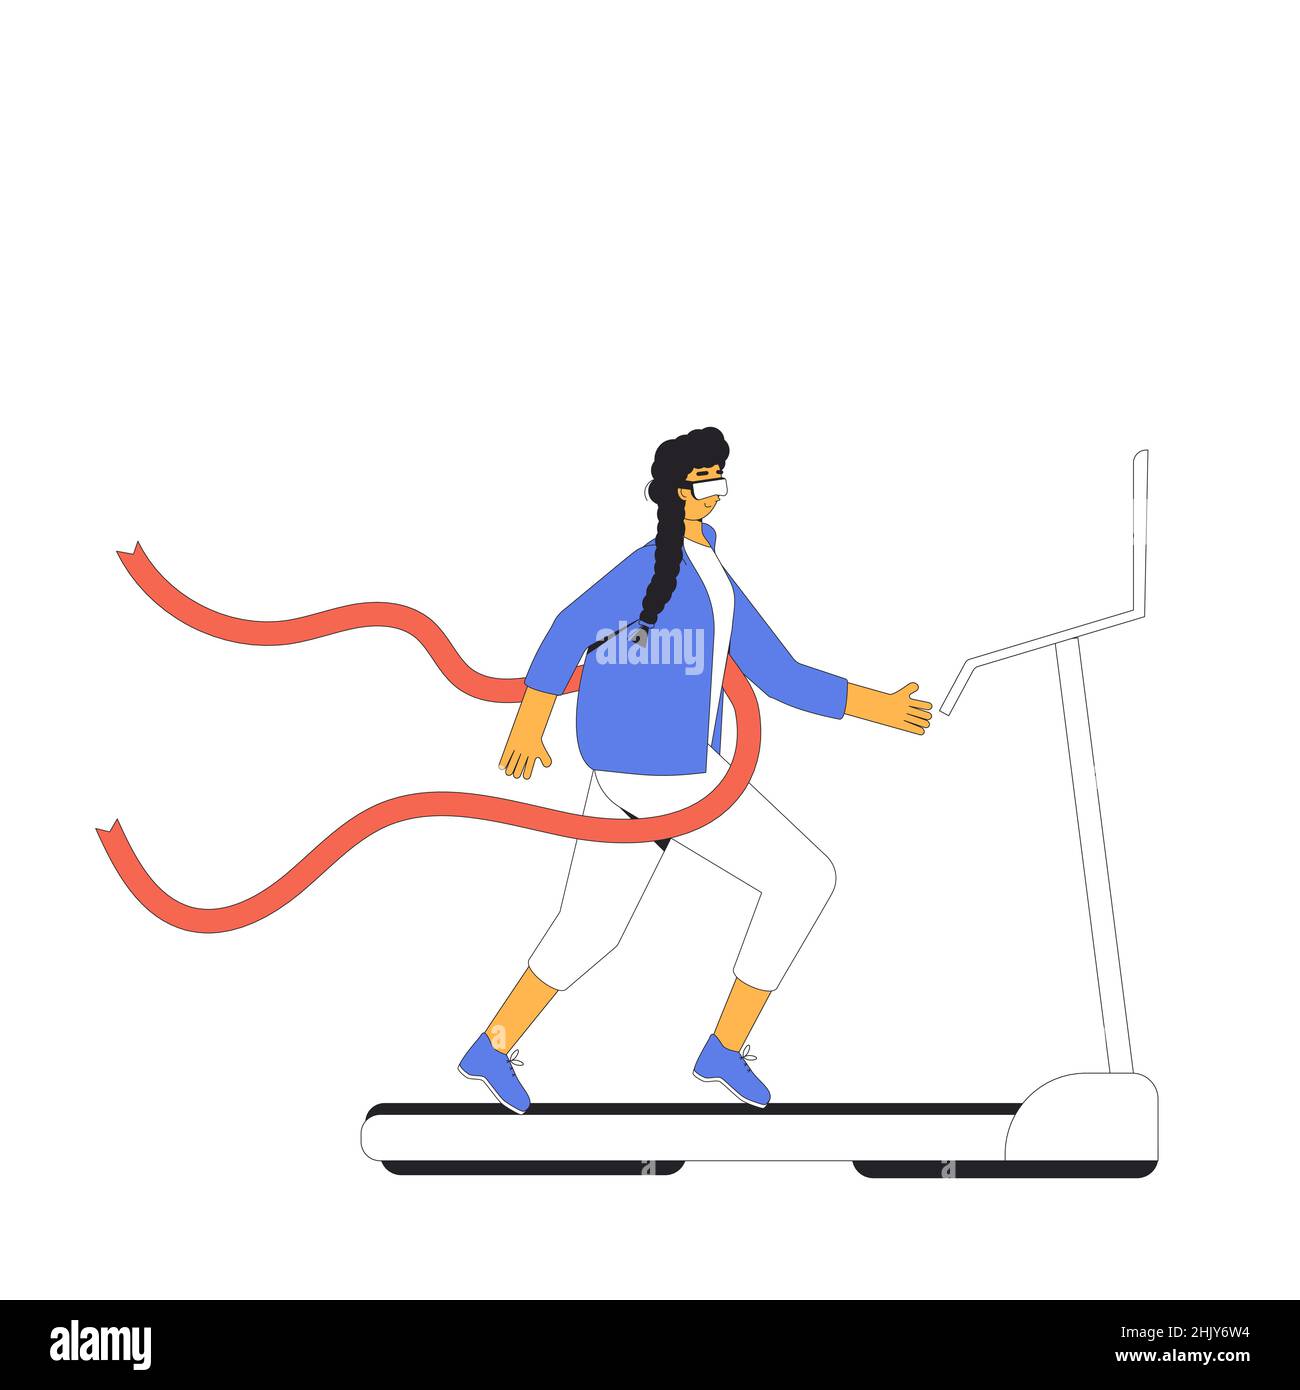 Virtual reality. Running woman on treadmill with VR headset glasses. Victory dreaming. Vector illustration. Stock Vector